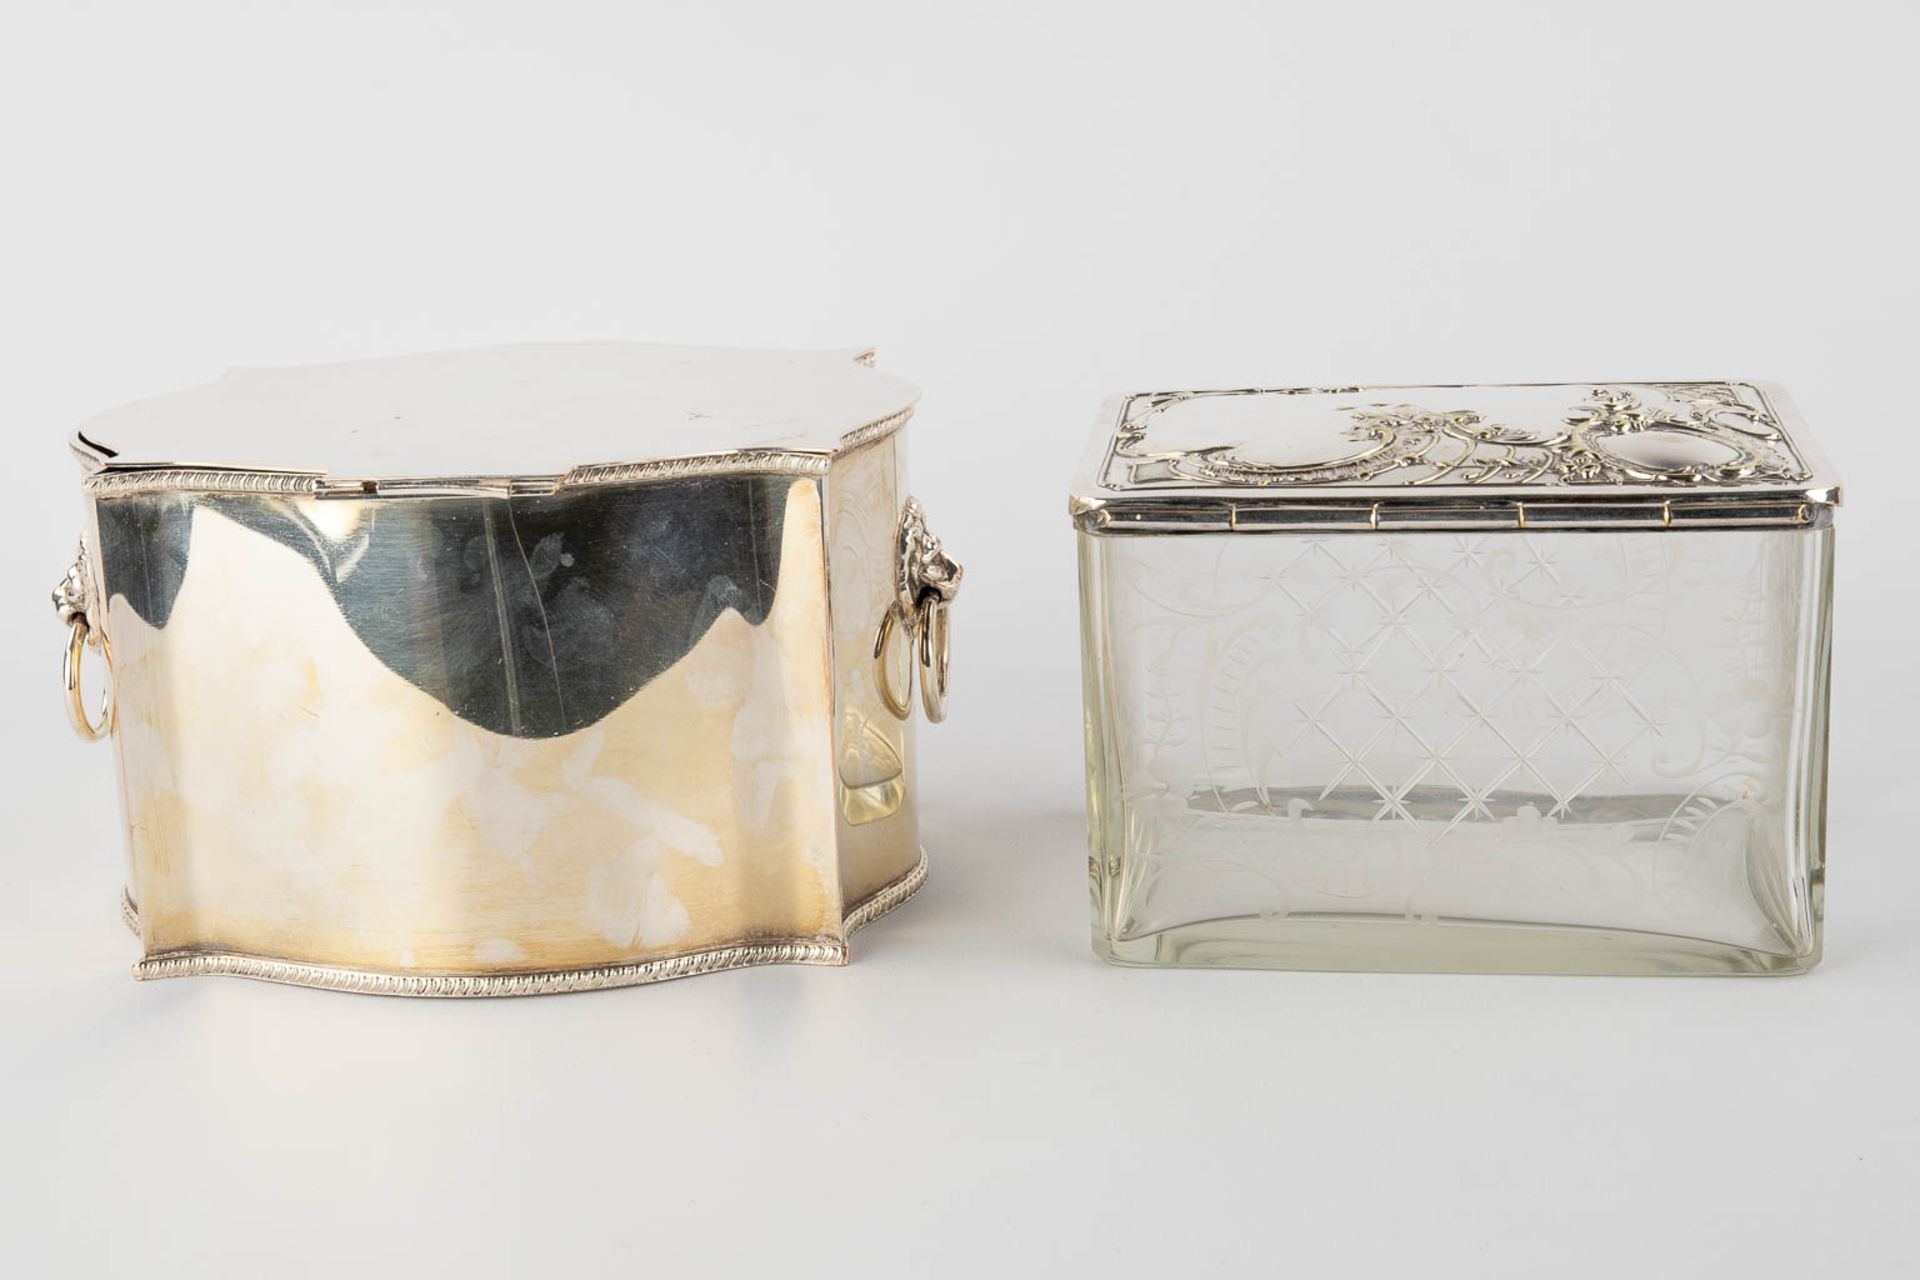 Four silver-plated storage boxes, ice-pails. (H:27 x D:20 cm) - Image 14 of 20